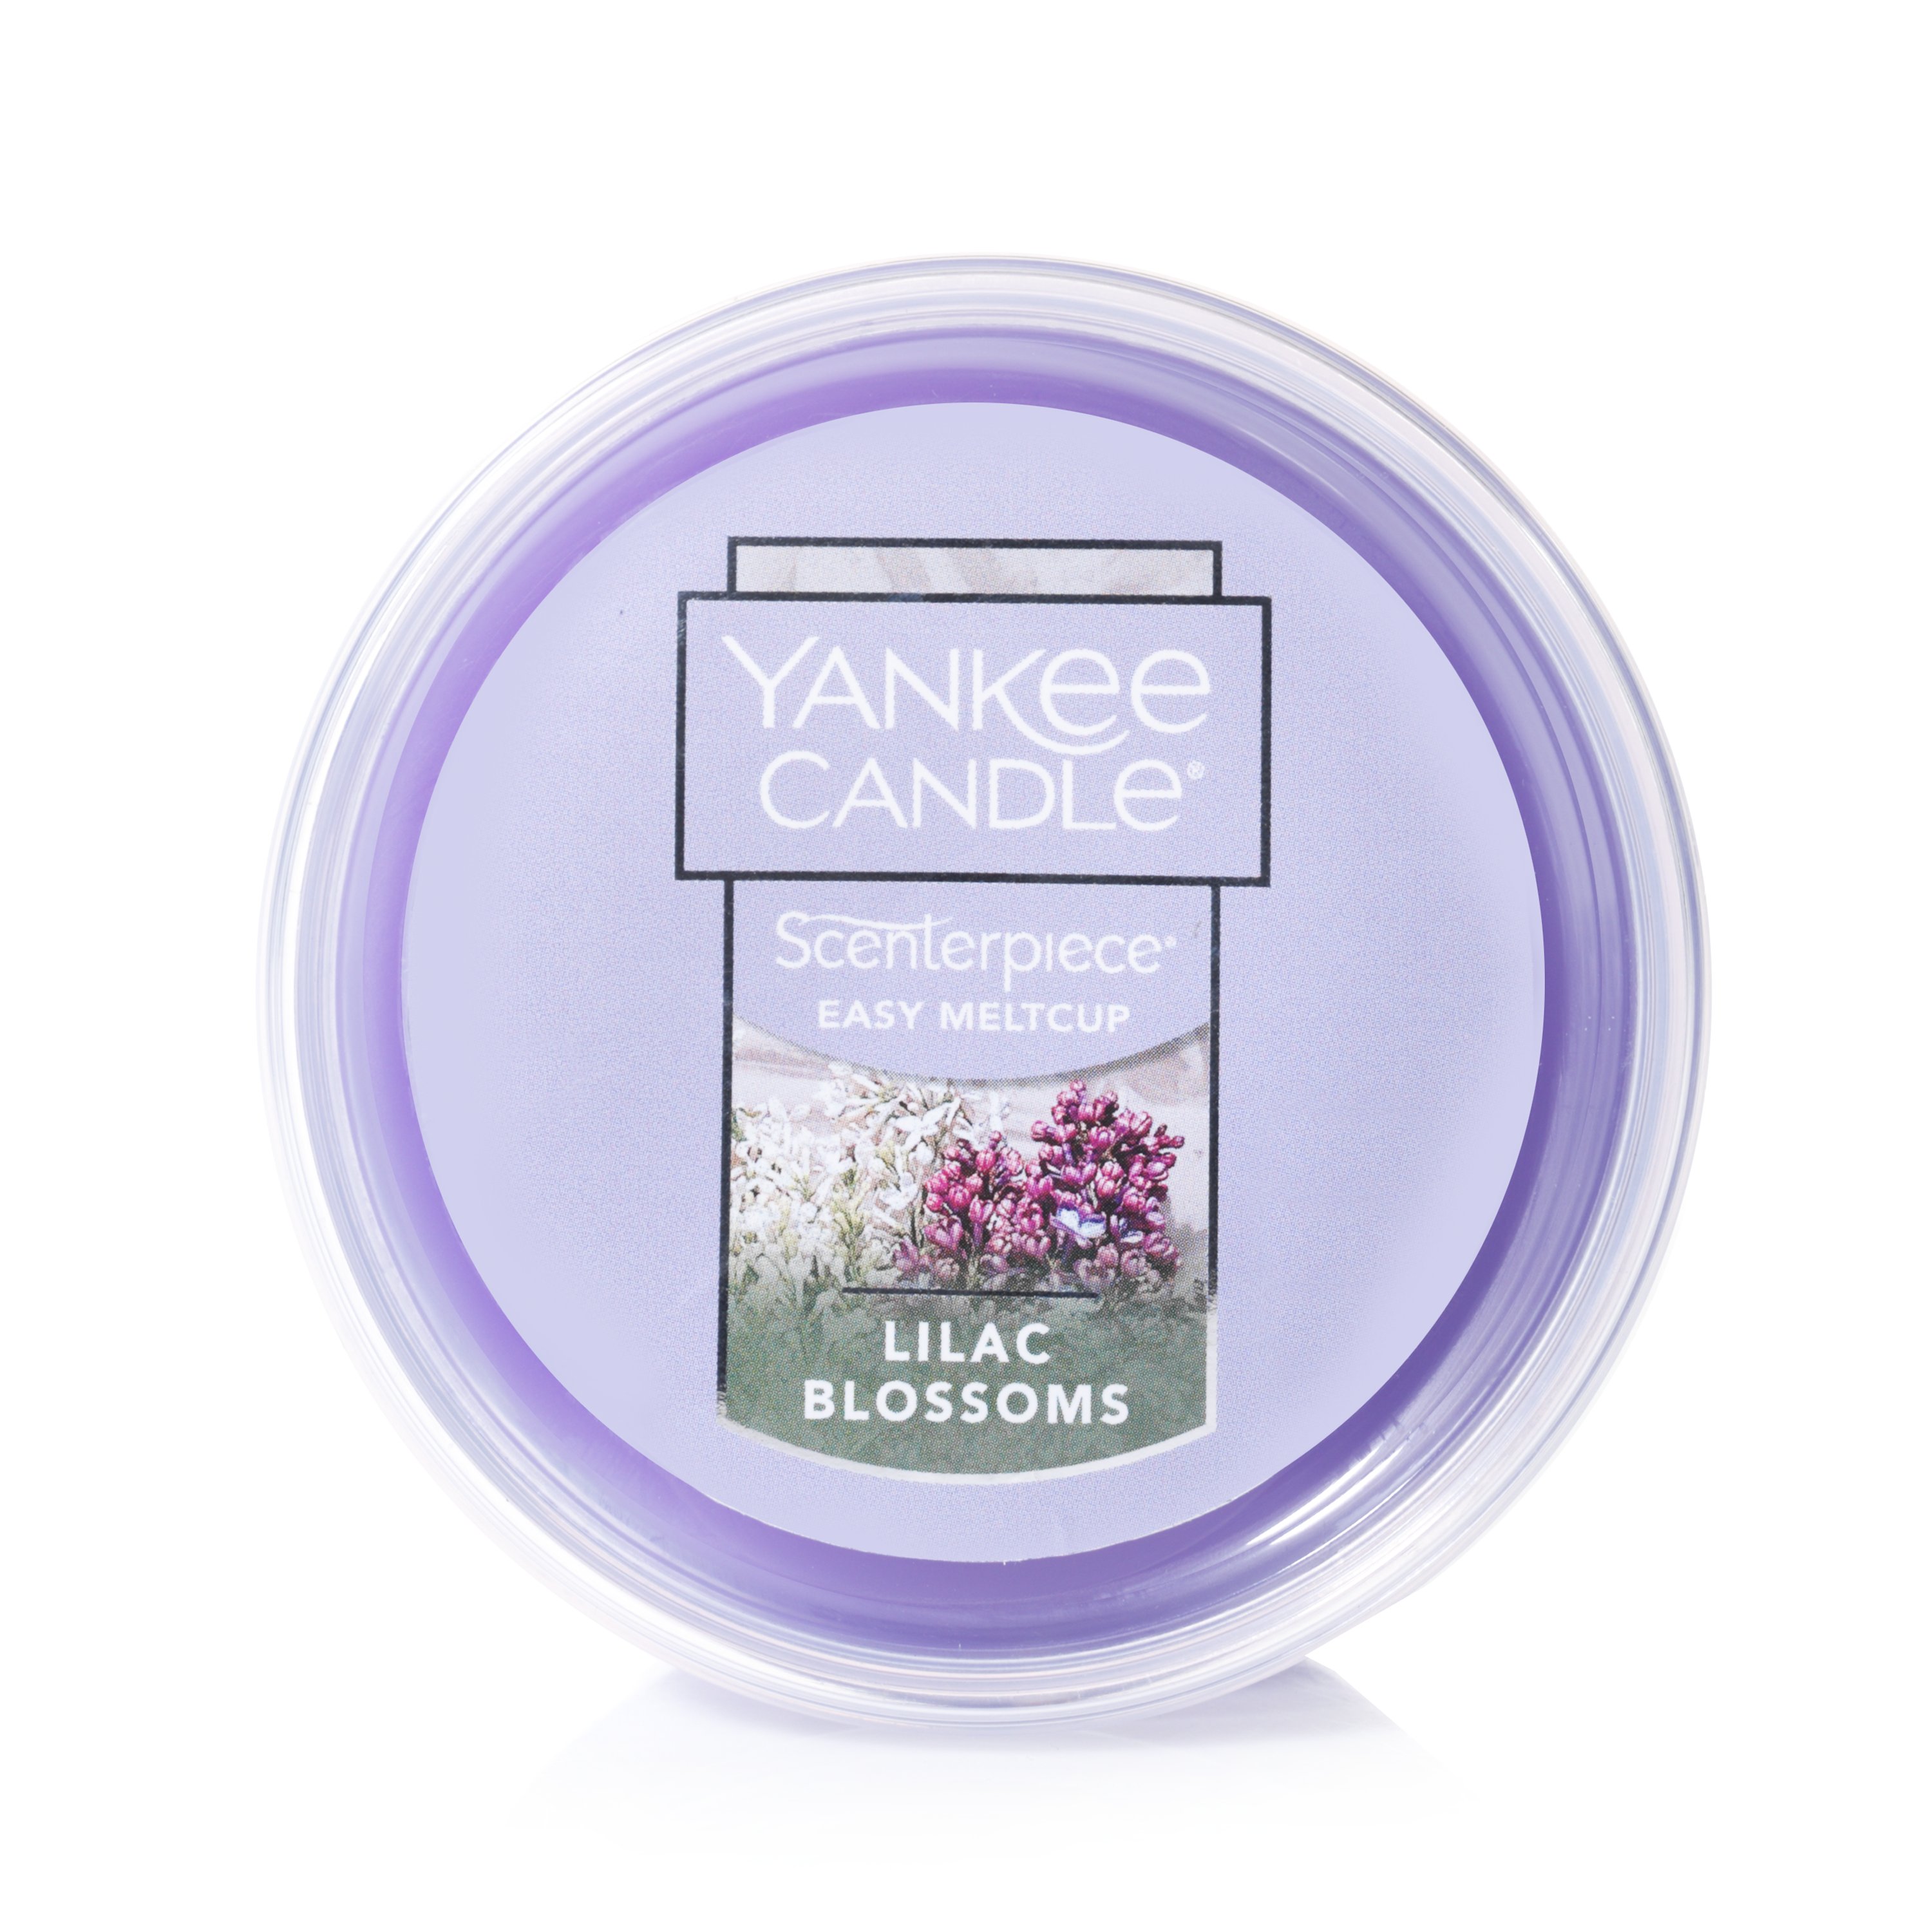 Yankee Candle® Lilac Blossom Gift Set